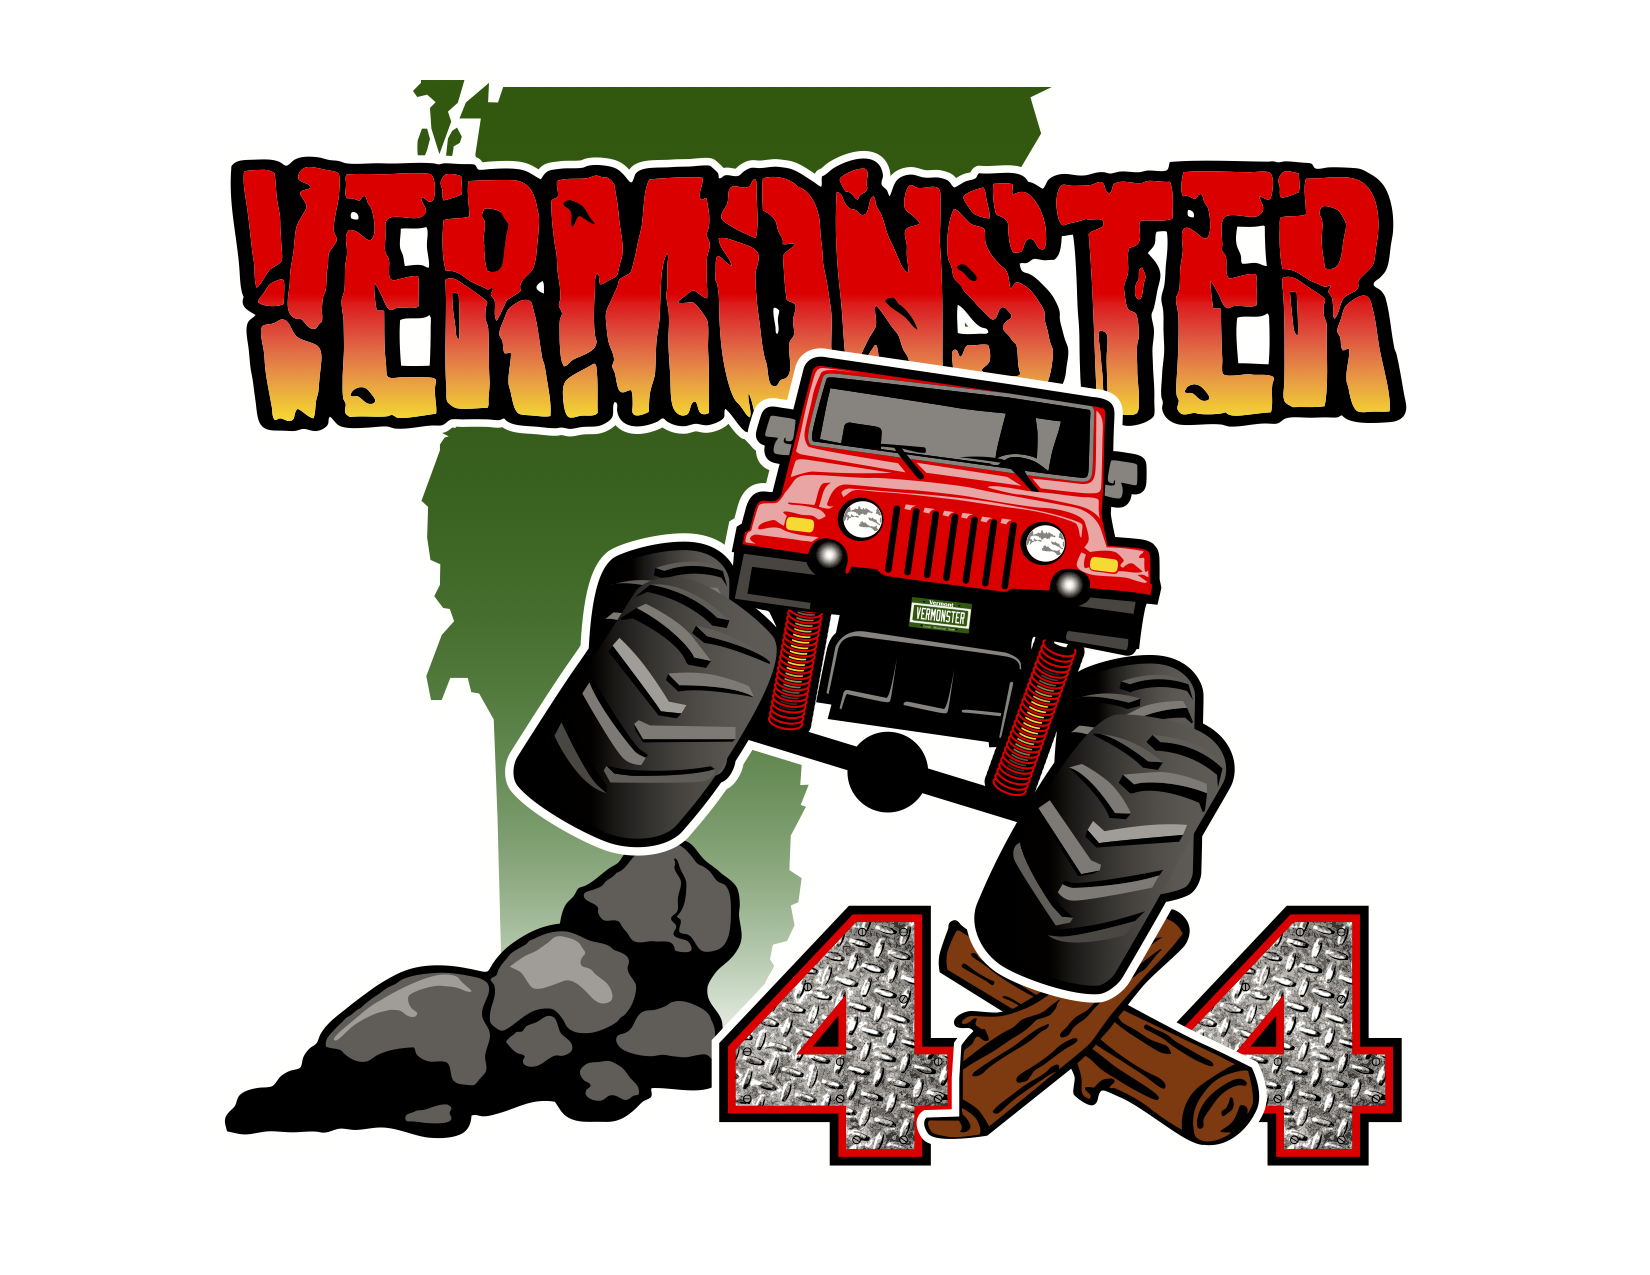 Vermonster with Jeep (1).png